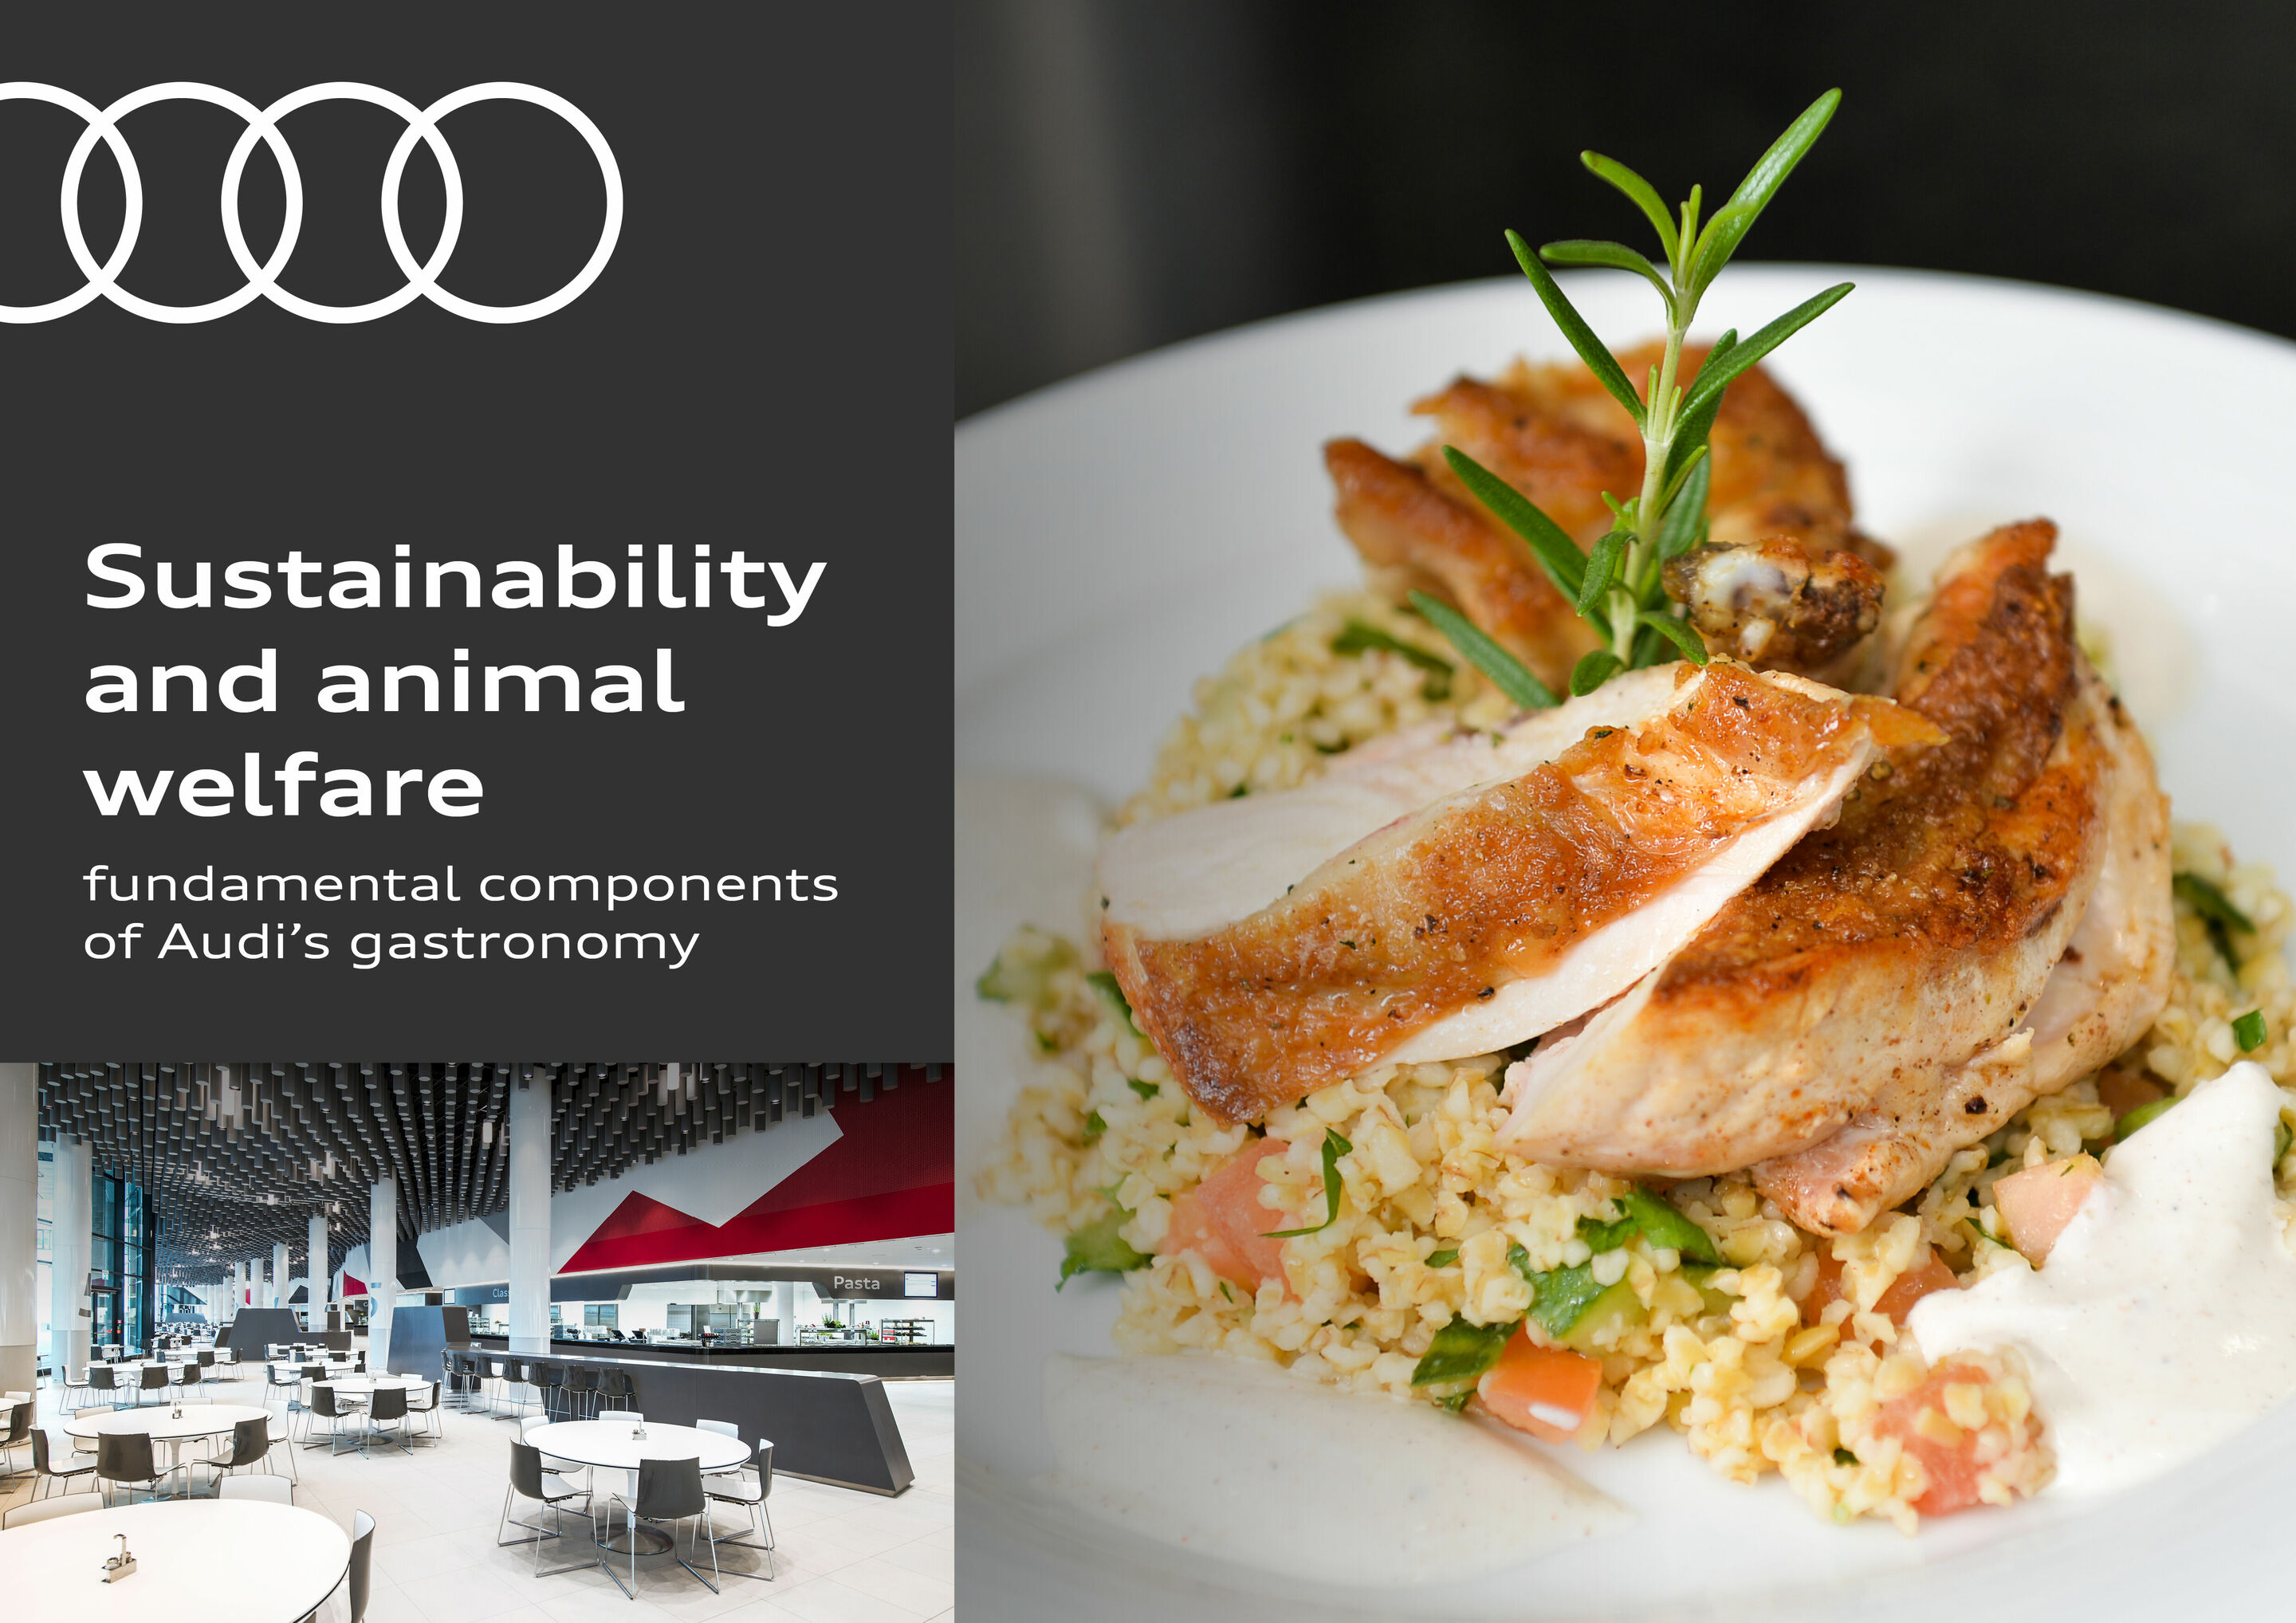 Sustainability and animal welfare as fundamental components of Audi’s gastronomy service